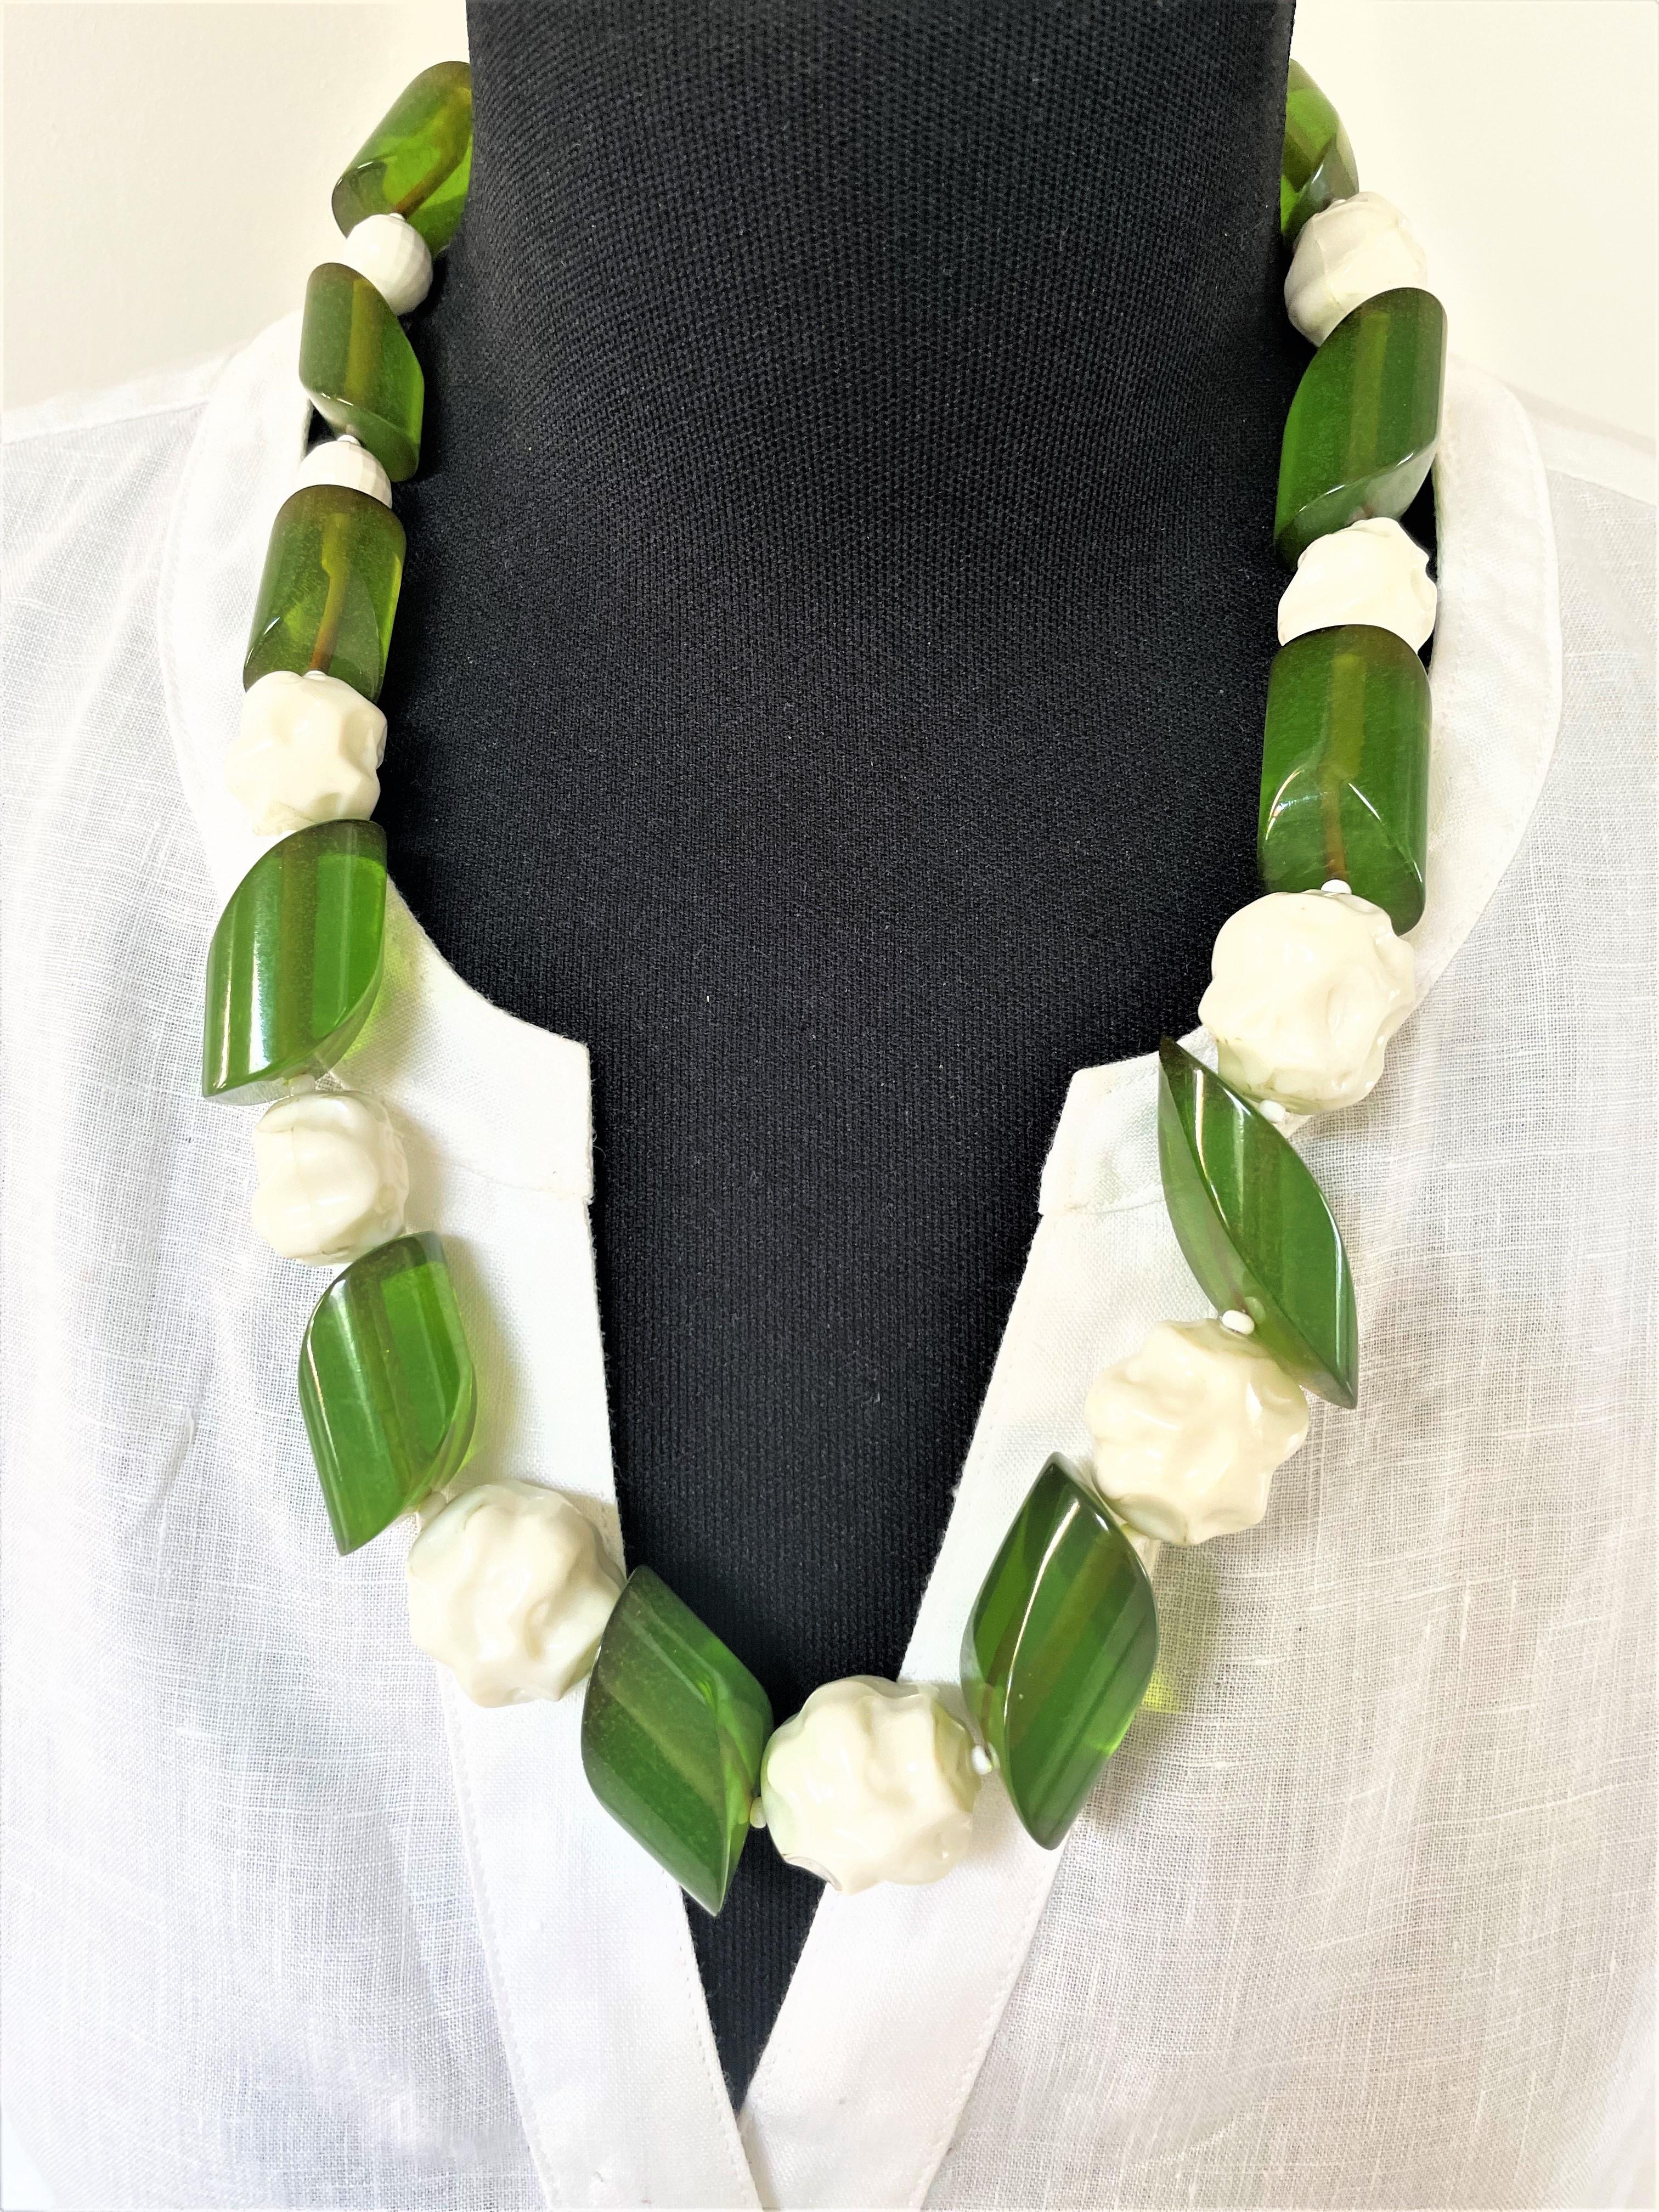 Contrasting 60 cm long chain consisting of green transparent , tubular, diagonally cut parts, possibly Bakelite and white plastic balls. This necklace coms from the USA. Very decorative, very comfortable to wear in terms of weight. The green oval